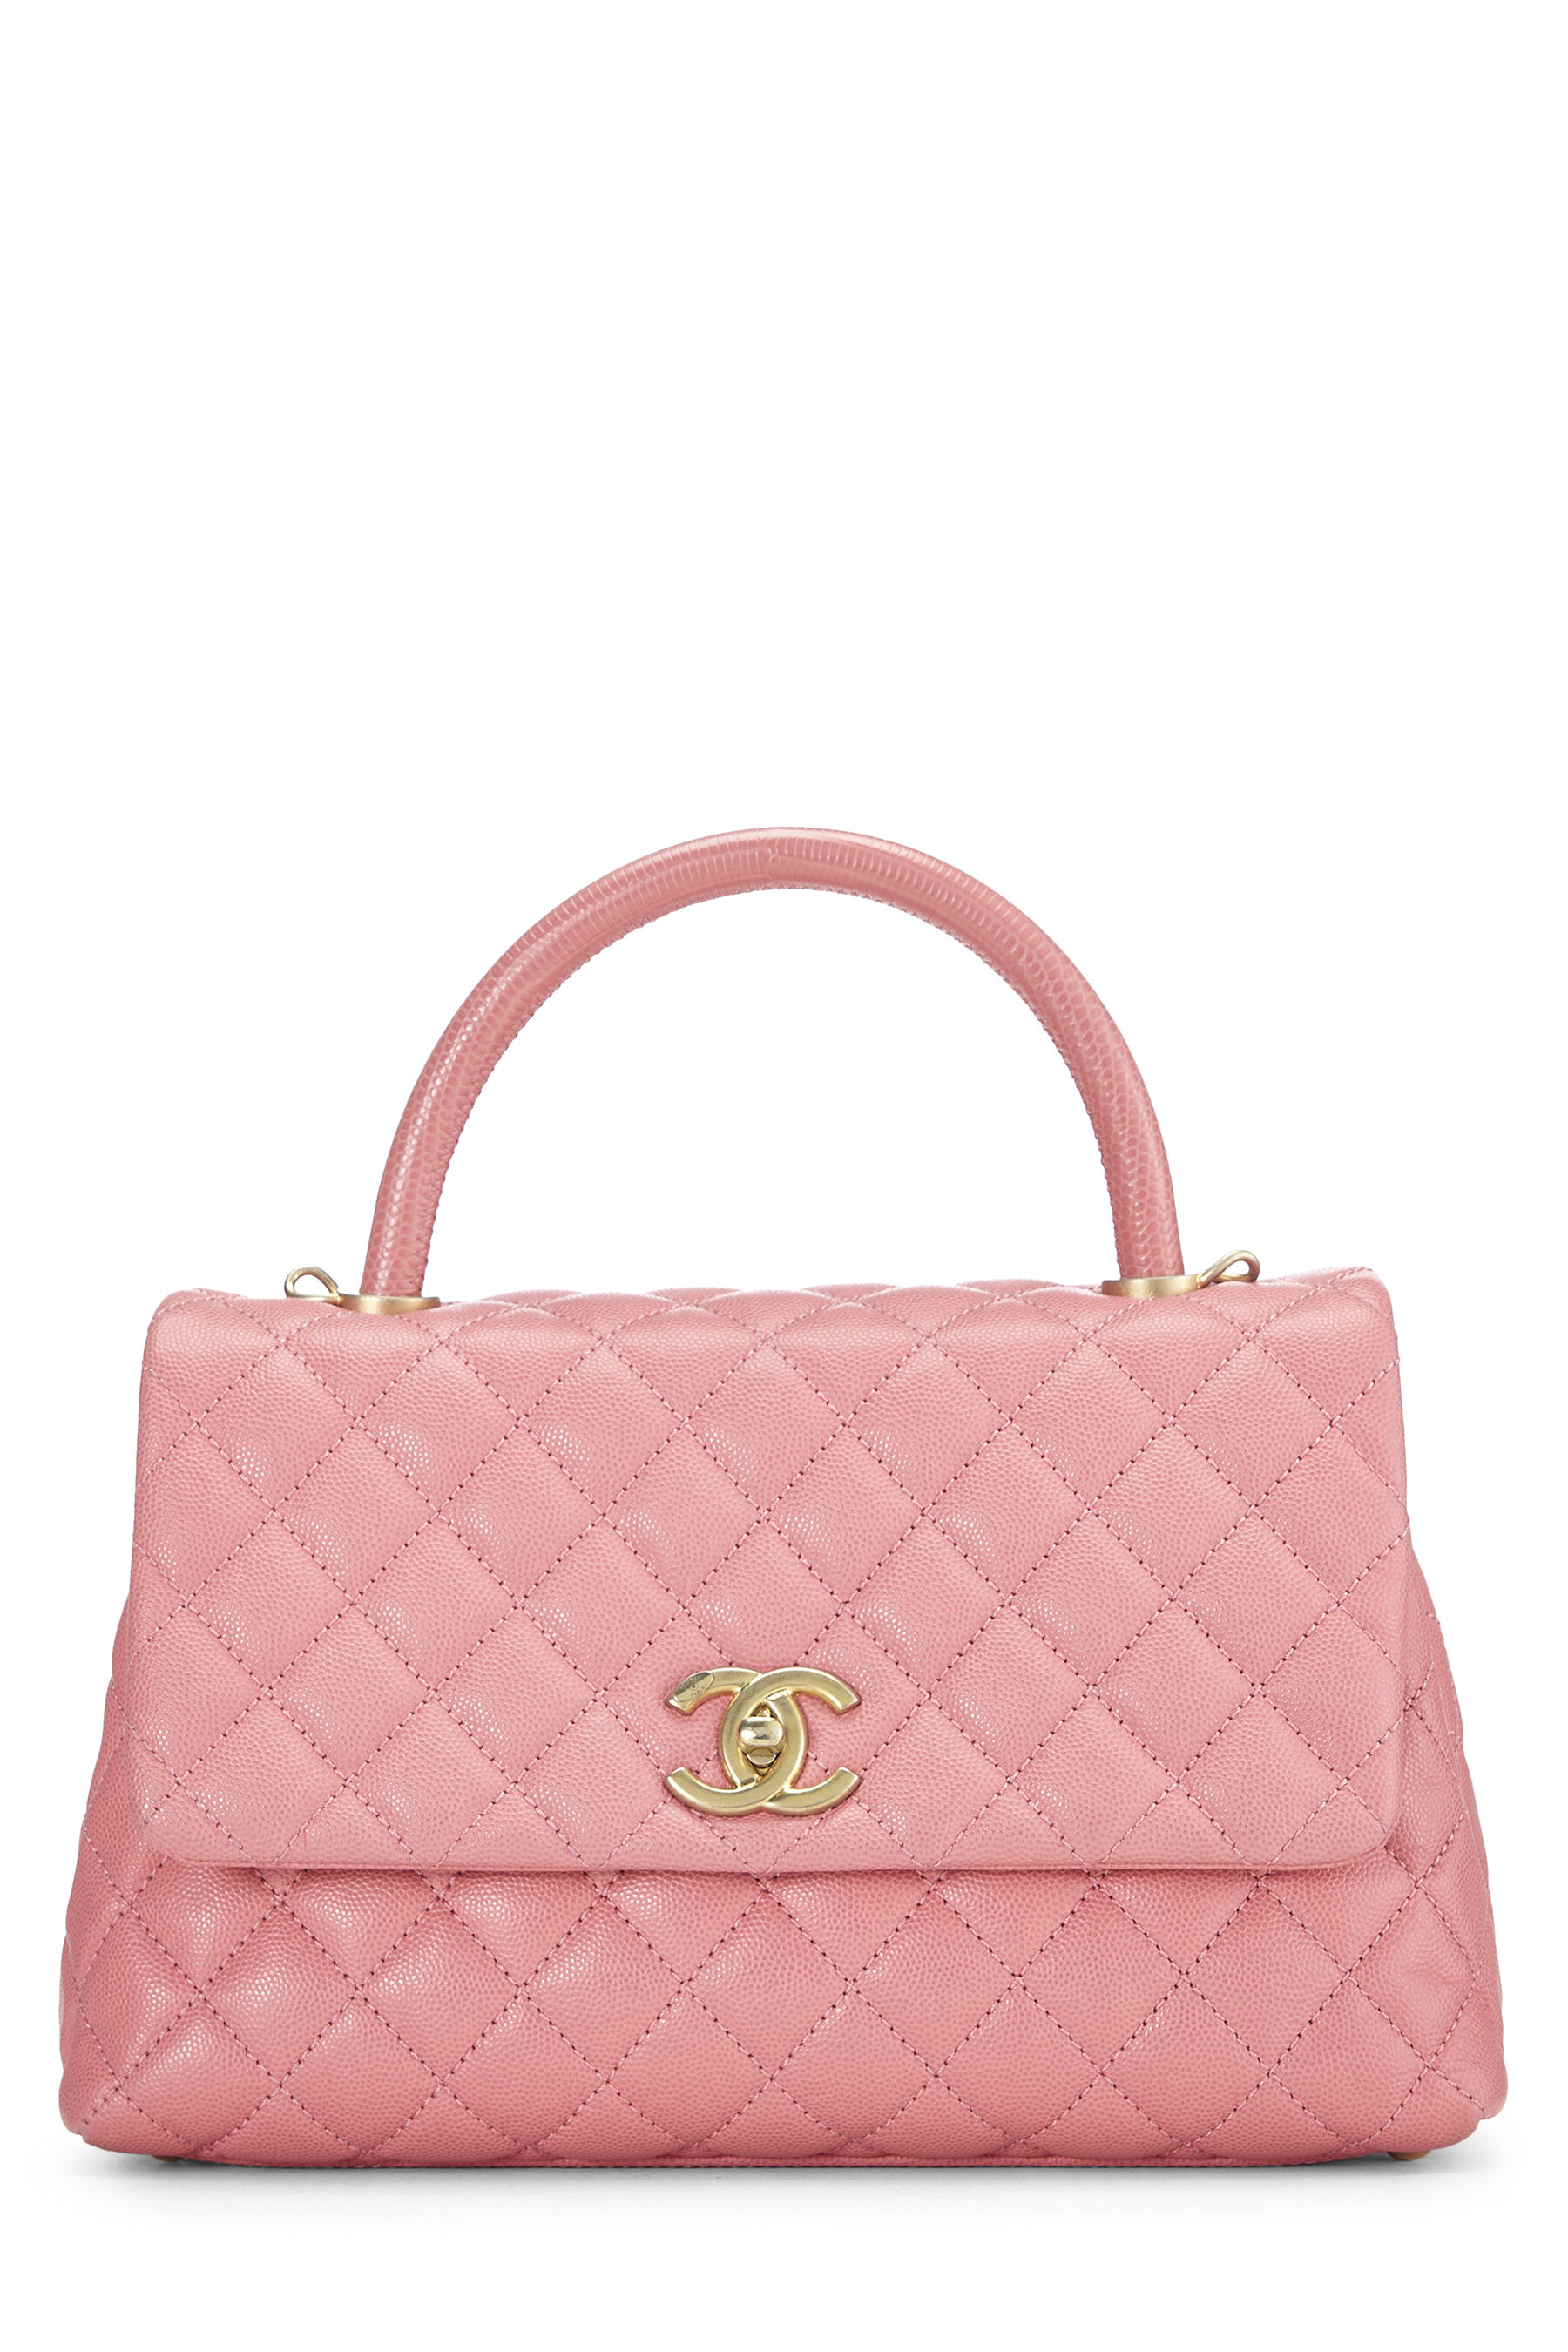 Chanel Pink Quilted Caviar Extra Mini Coco Top Handle Flap Bag